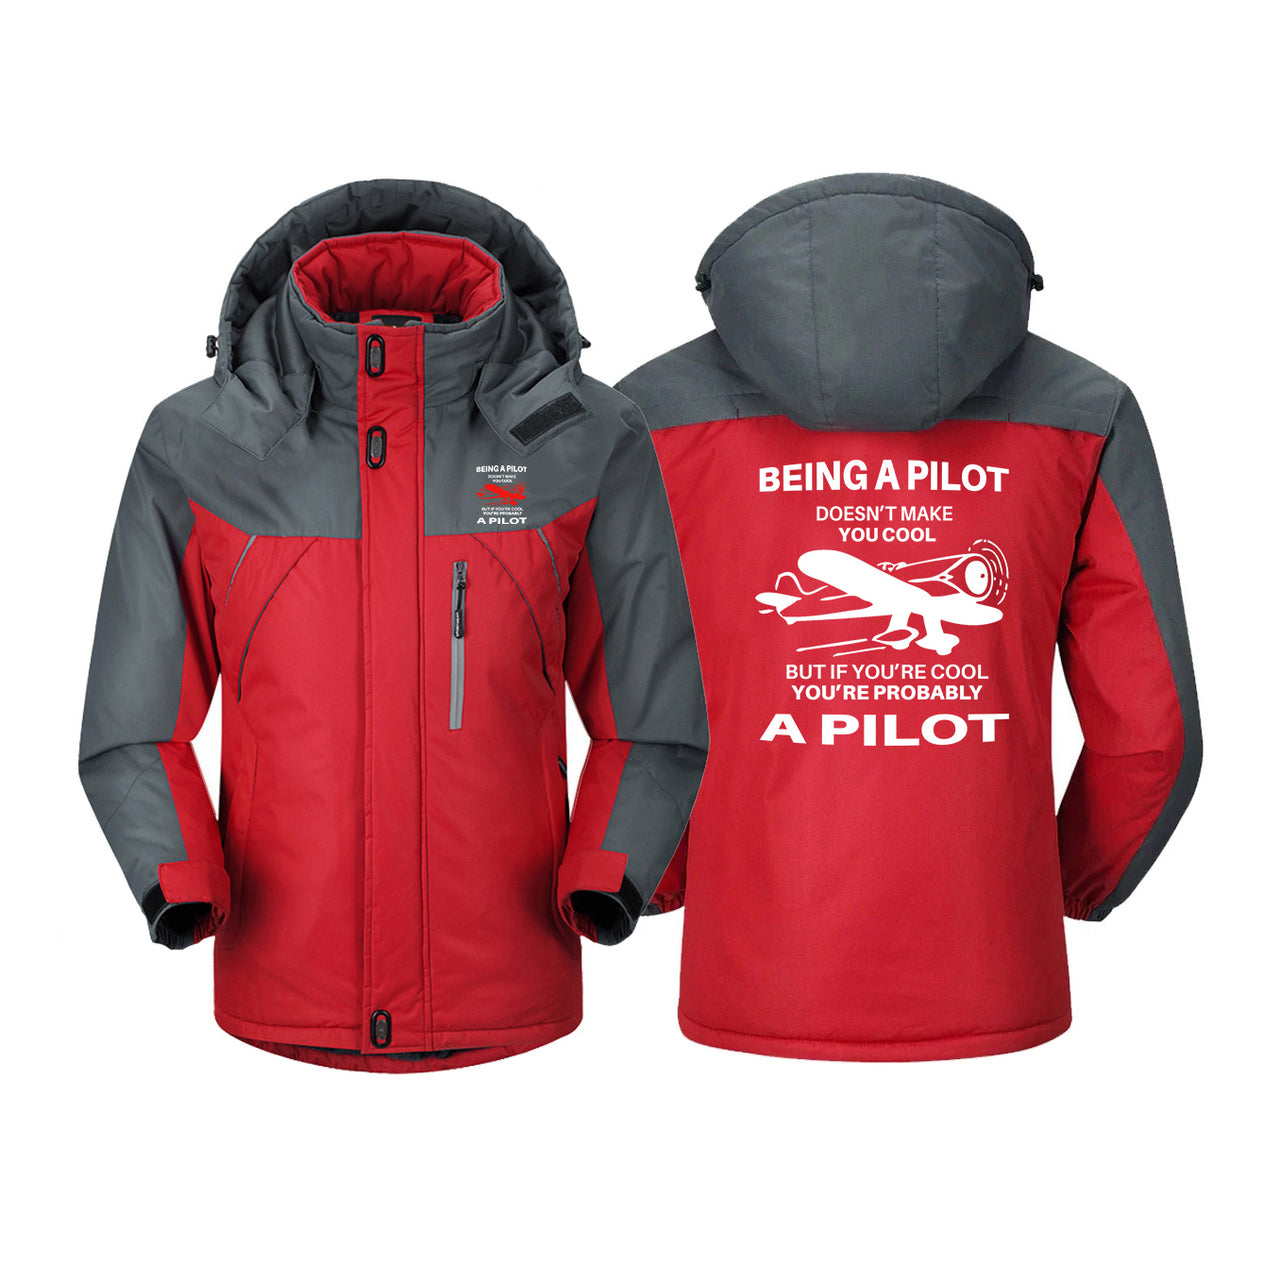 If You're Cool You're Probably a Pilot Designed Thick Winter Jackets